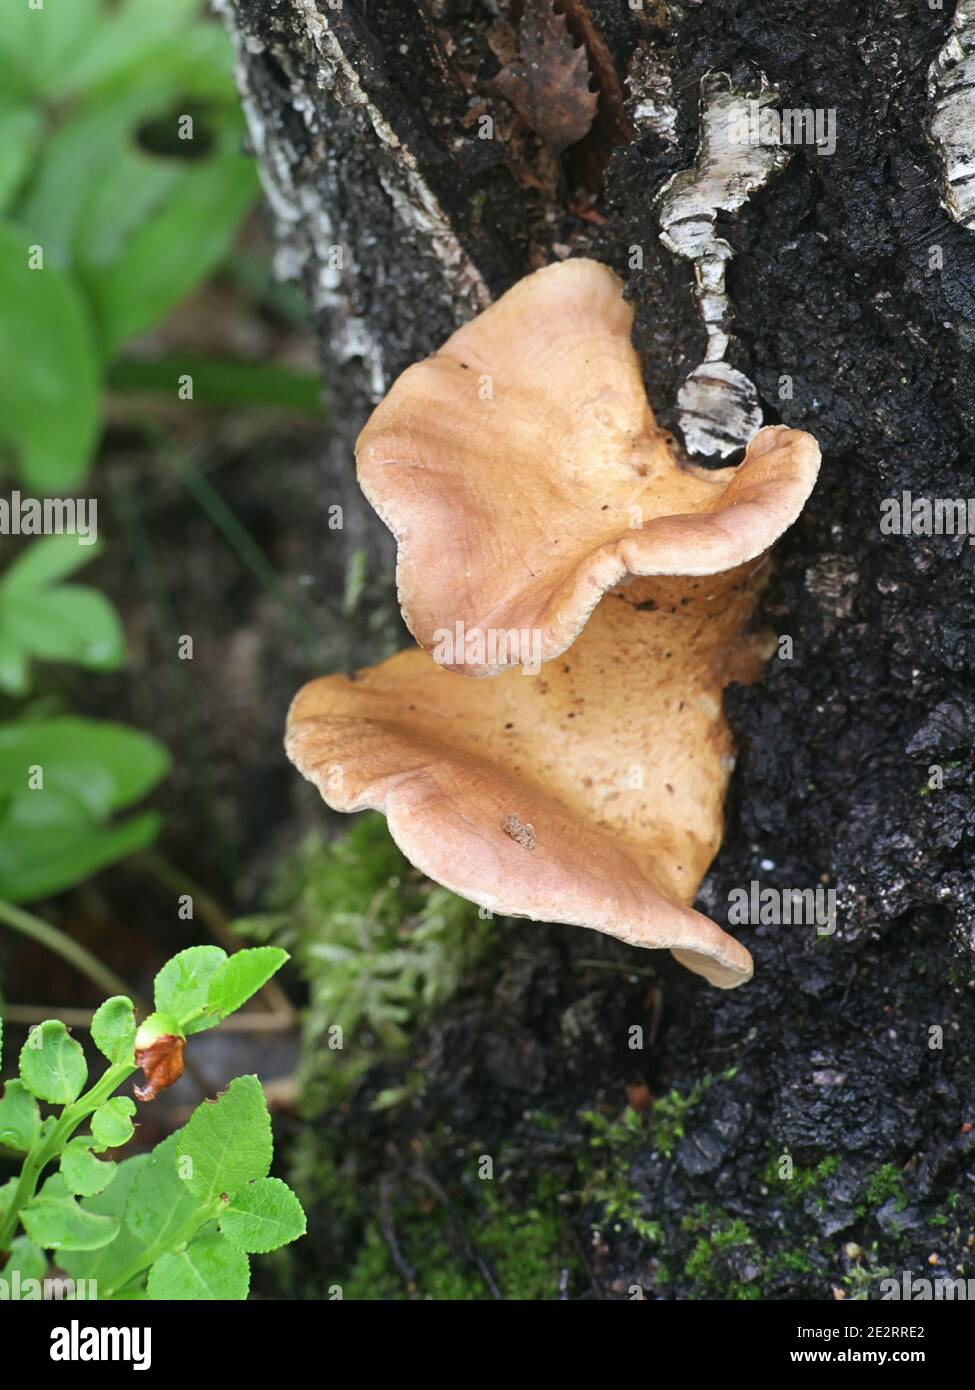 Lentinus conchatus, also called Panus conchatus, commonly known as the lilac oysterling, wild mushroom from Finland Stock Photo